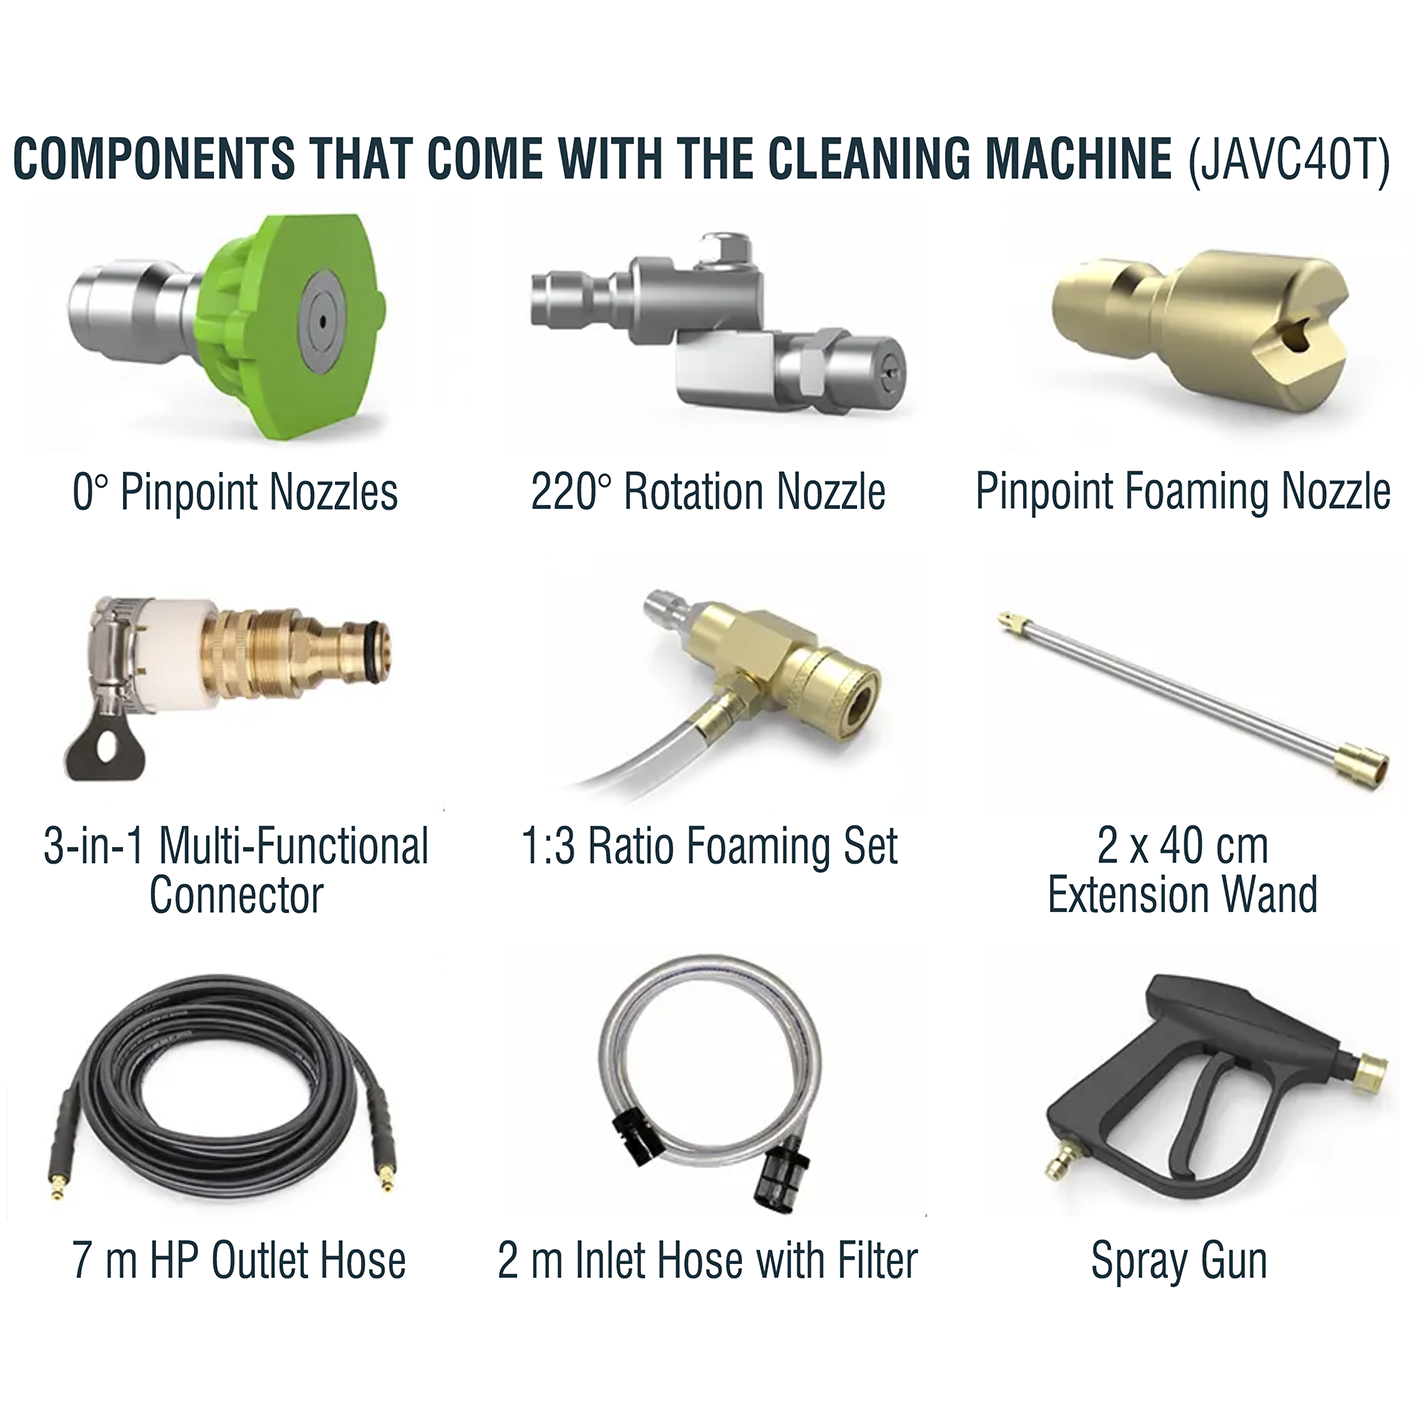 COMPONENTS INCLUDED with the WIPCOOL ADJUSTABLE HIGH PRESSURE CLEANING MACHINE (JAVC40T)